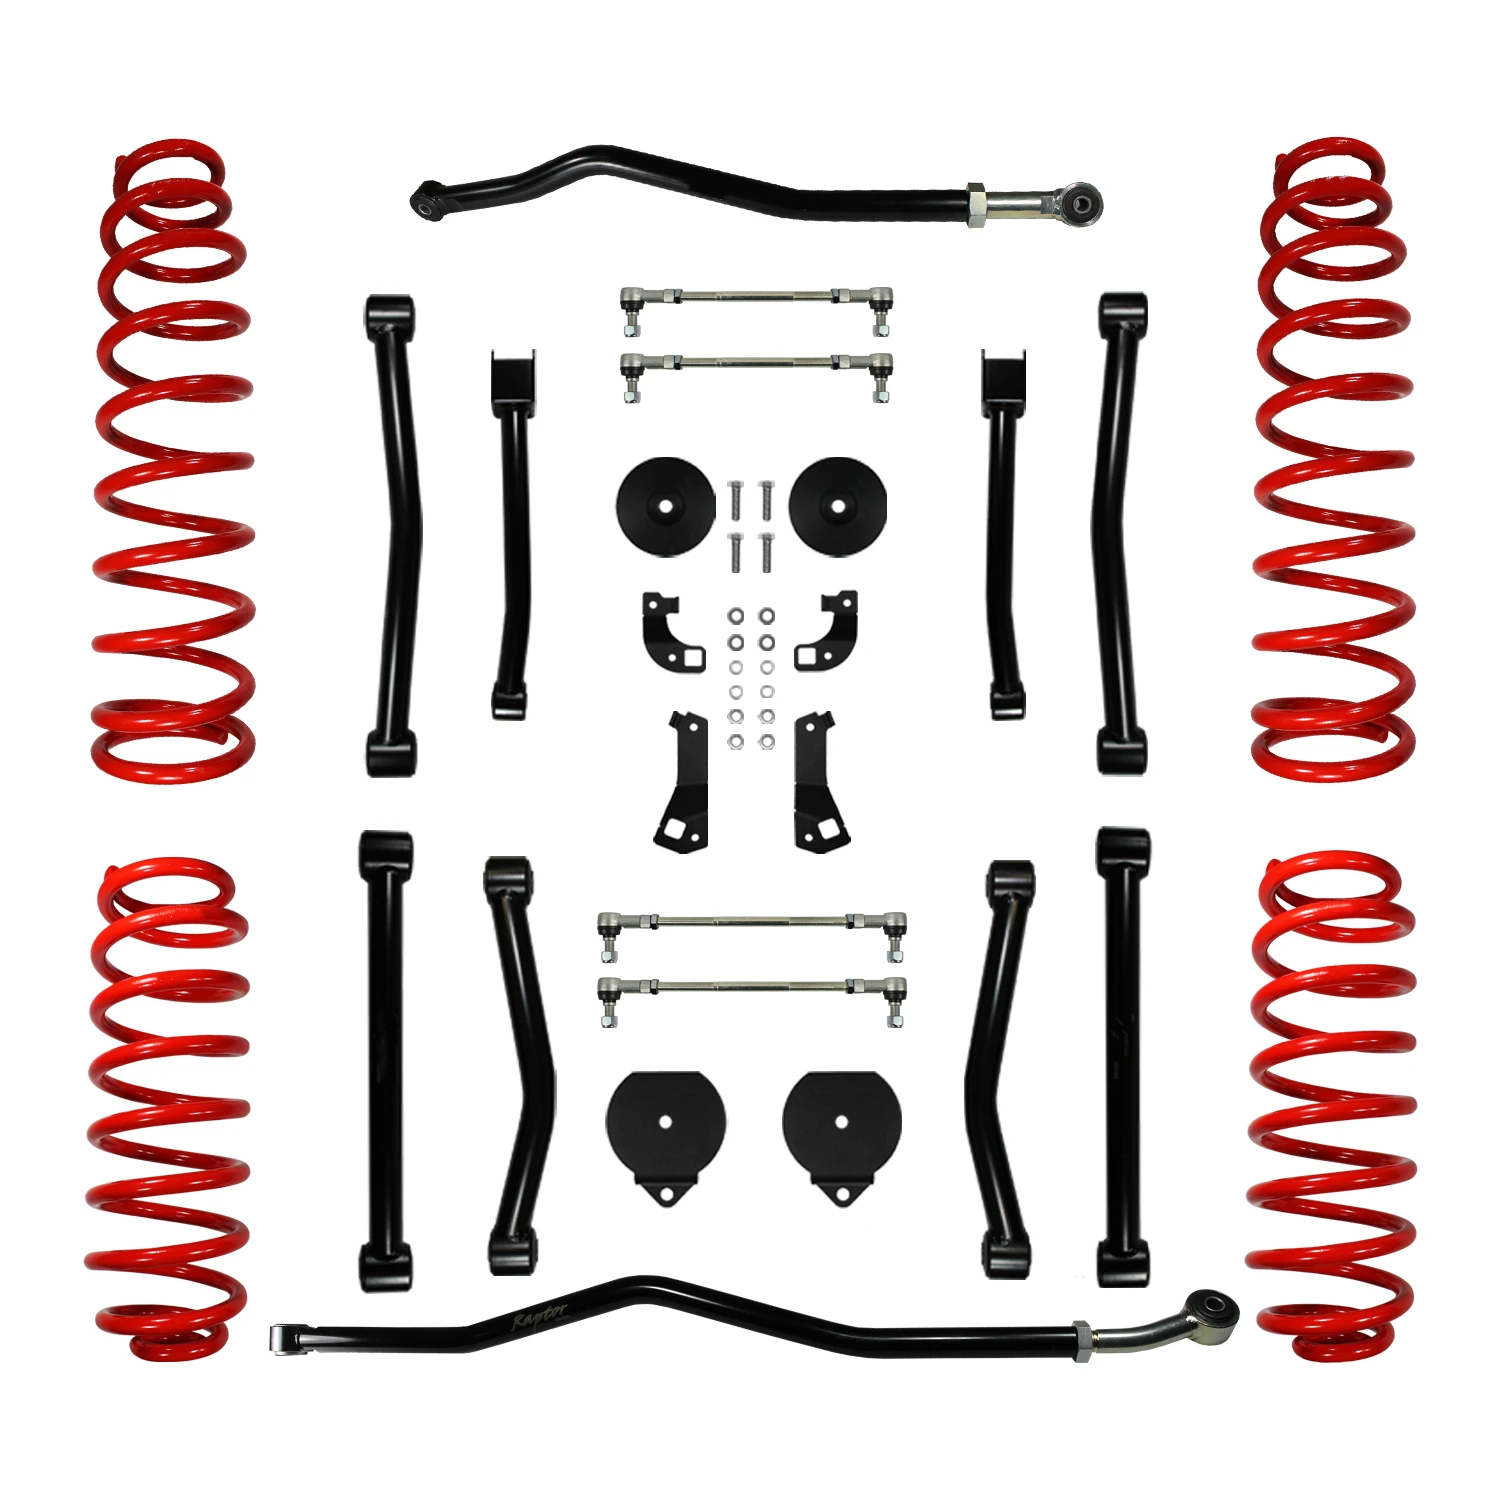 

4x4 Offroad 2.5" Lift Coil Spring Suspension Kit For 2007-2018 Jeep Wrangler JK Control Short Arm Front Rear Track Bar Sway Lin